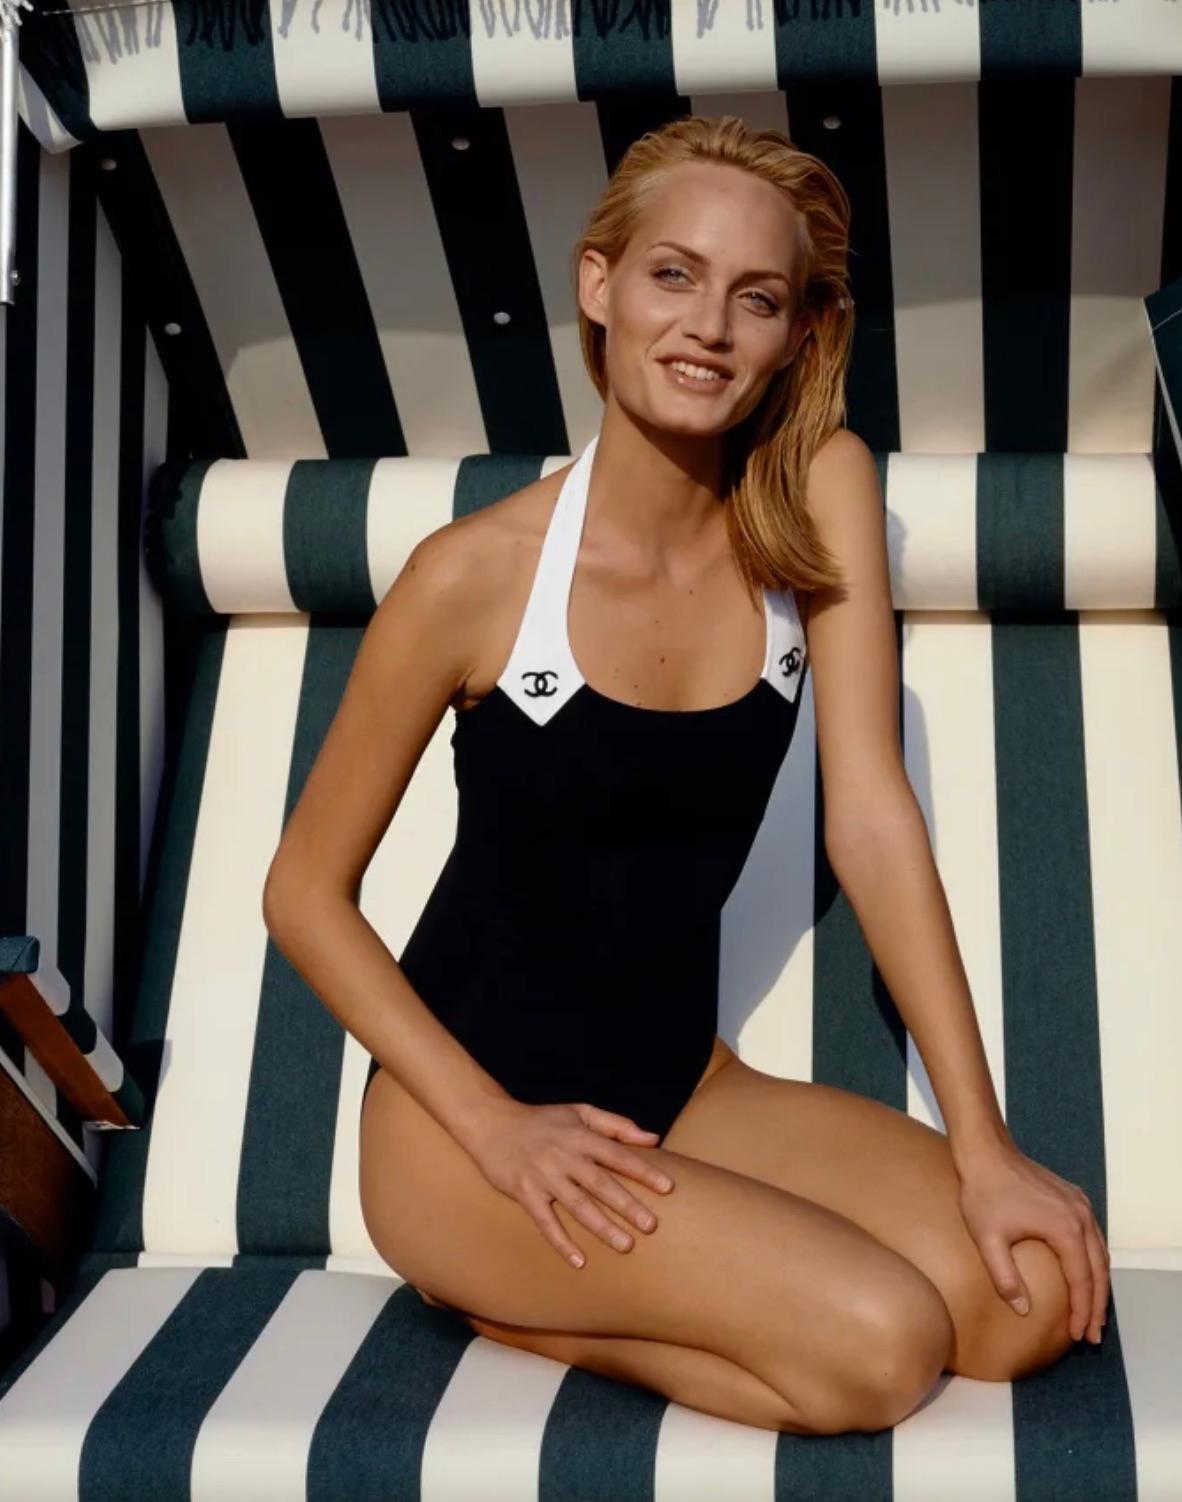 Introducing the stunning black and white logo swimsuit, a rare and coveted piece from the iconic 1996 cruise collection designed by the legendary Karl Lagerfeld for Chanel. Featuring embroidered logos and contrasting ivory white trims, this swimsuit